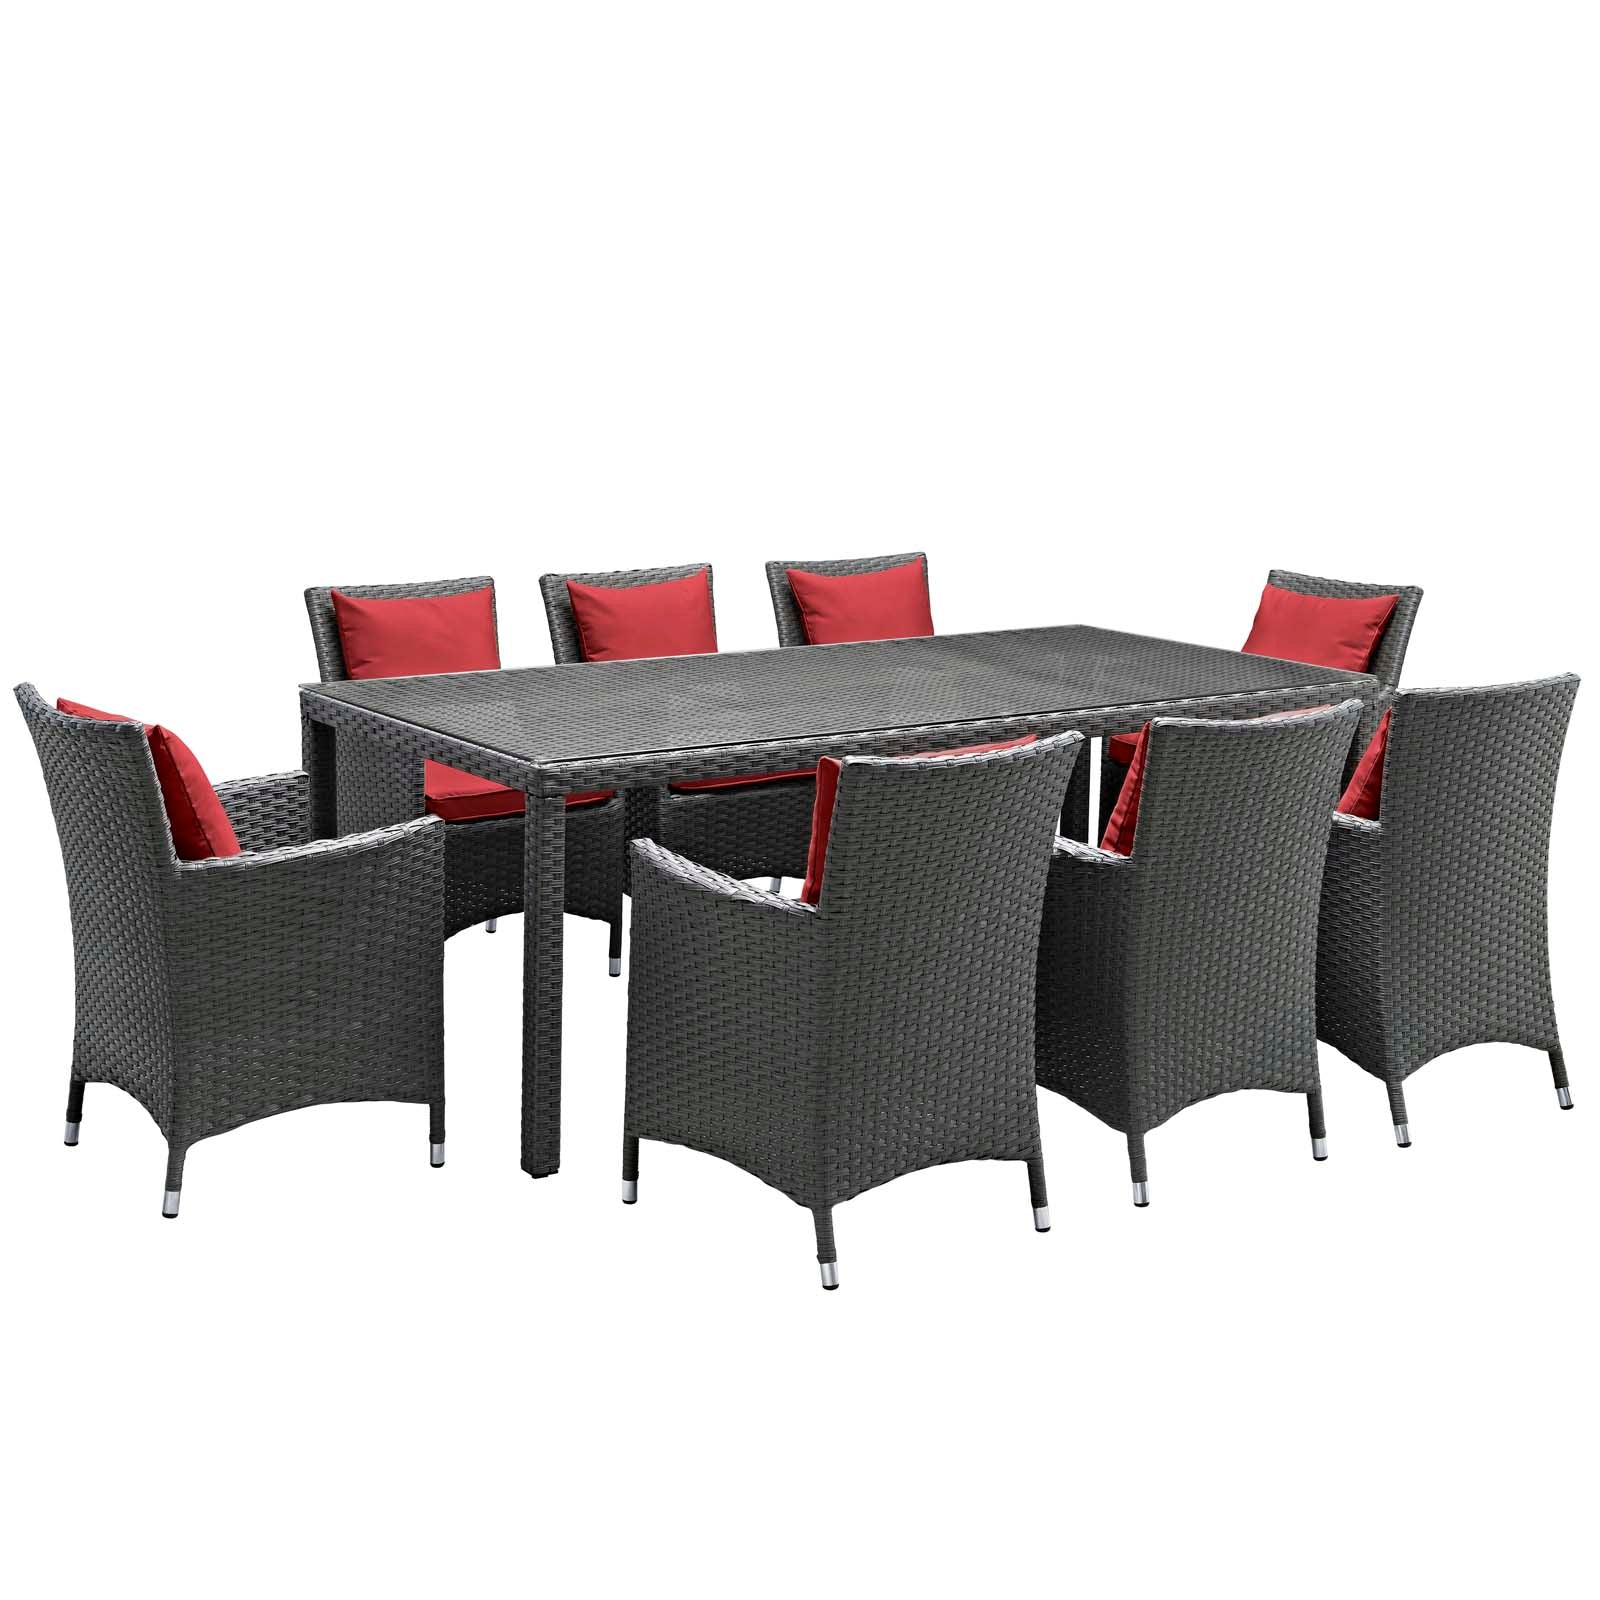 Modway Outdoor Dining Sets - Sojourn 9 Piece Outdoor Patio Sunbrella Dining Set Canvas Red